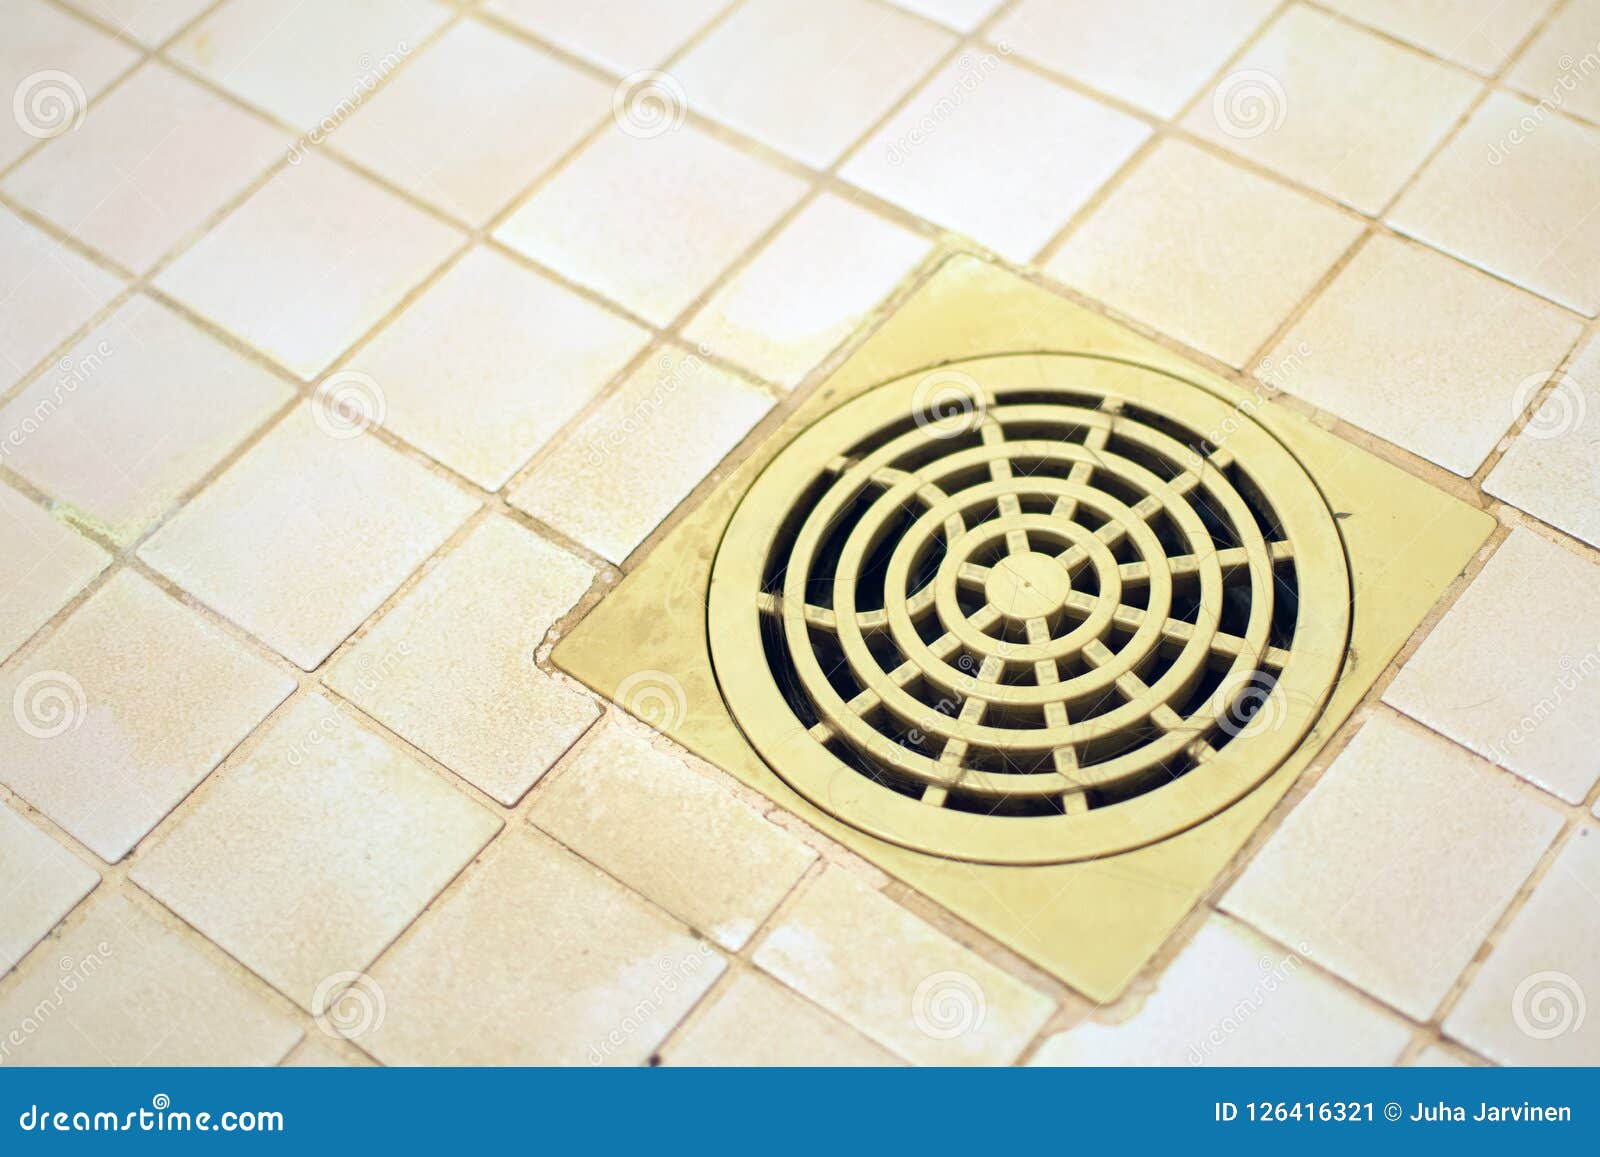 Bathroom Floor Drain With Hairy Strainer Stock Image Image Of